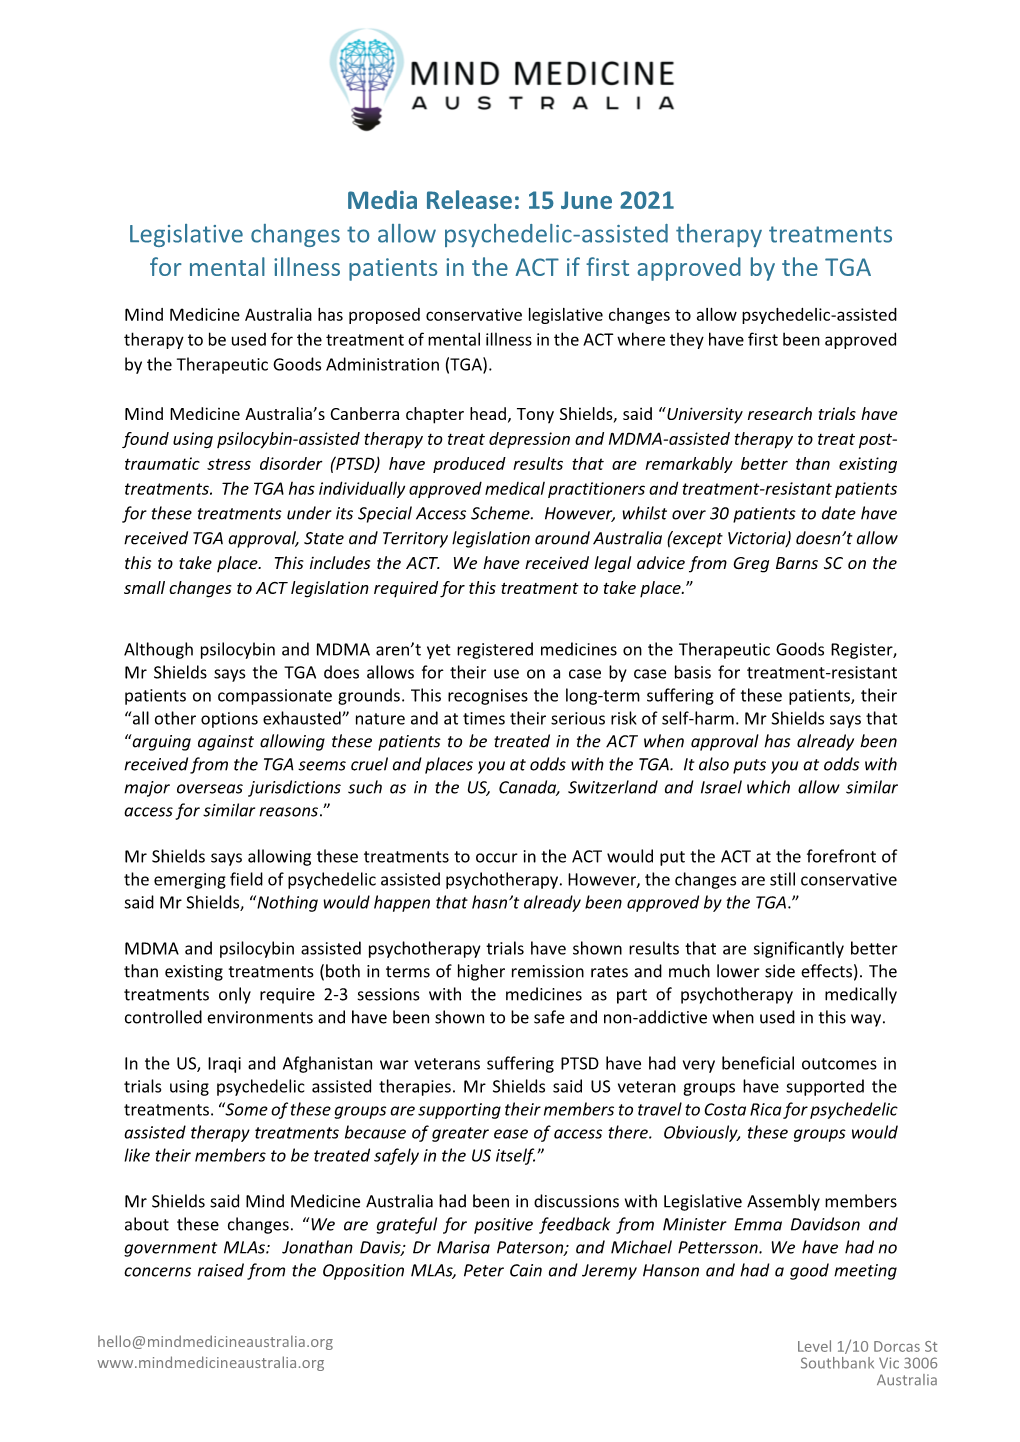 15 June 2021 Legislative Changes to Allow Psychedelic-Assisted Therapy Treatments for Mental Illness Patients in the ACT If First Approved by the TGA